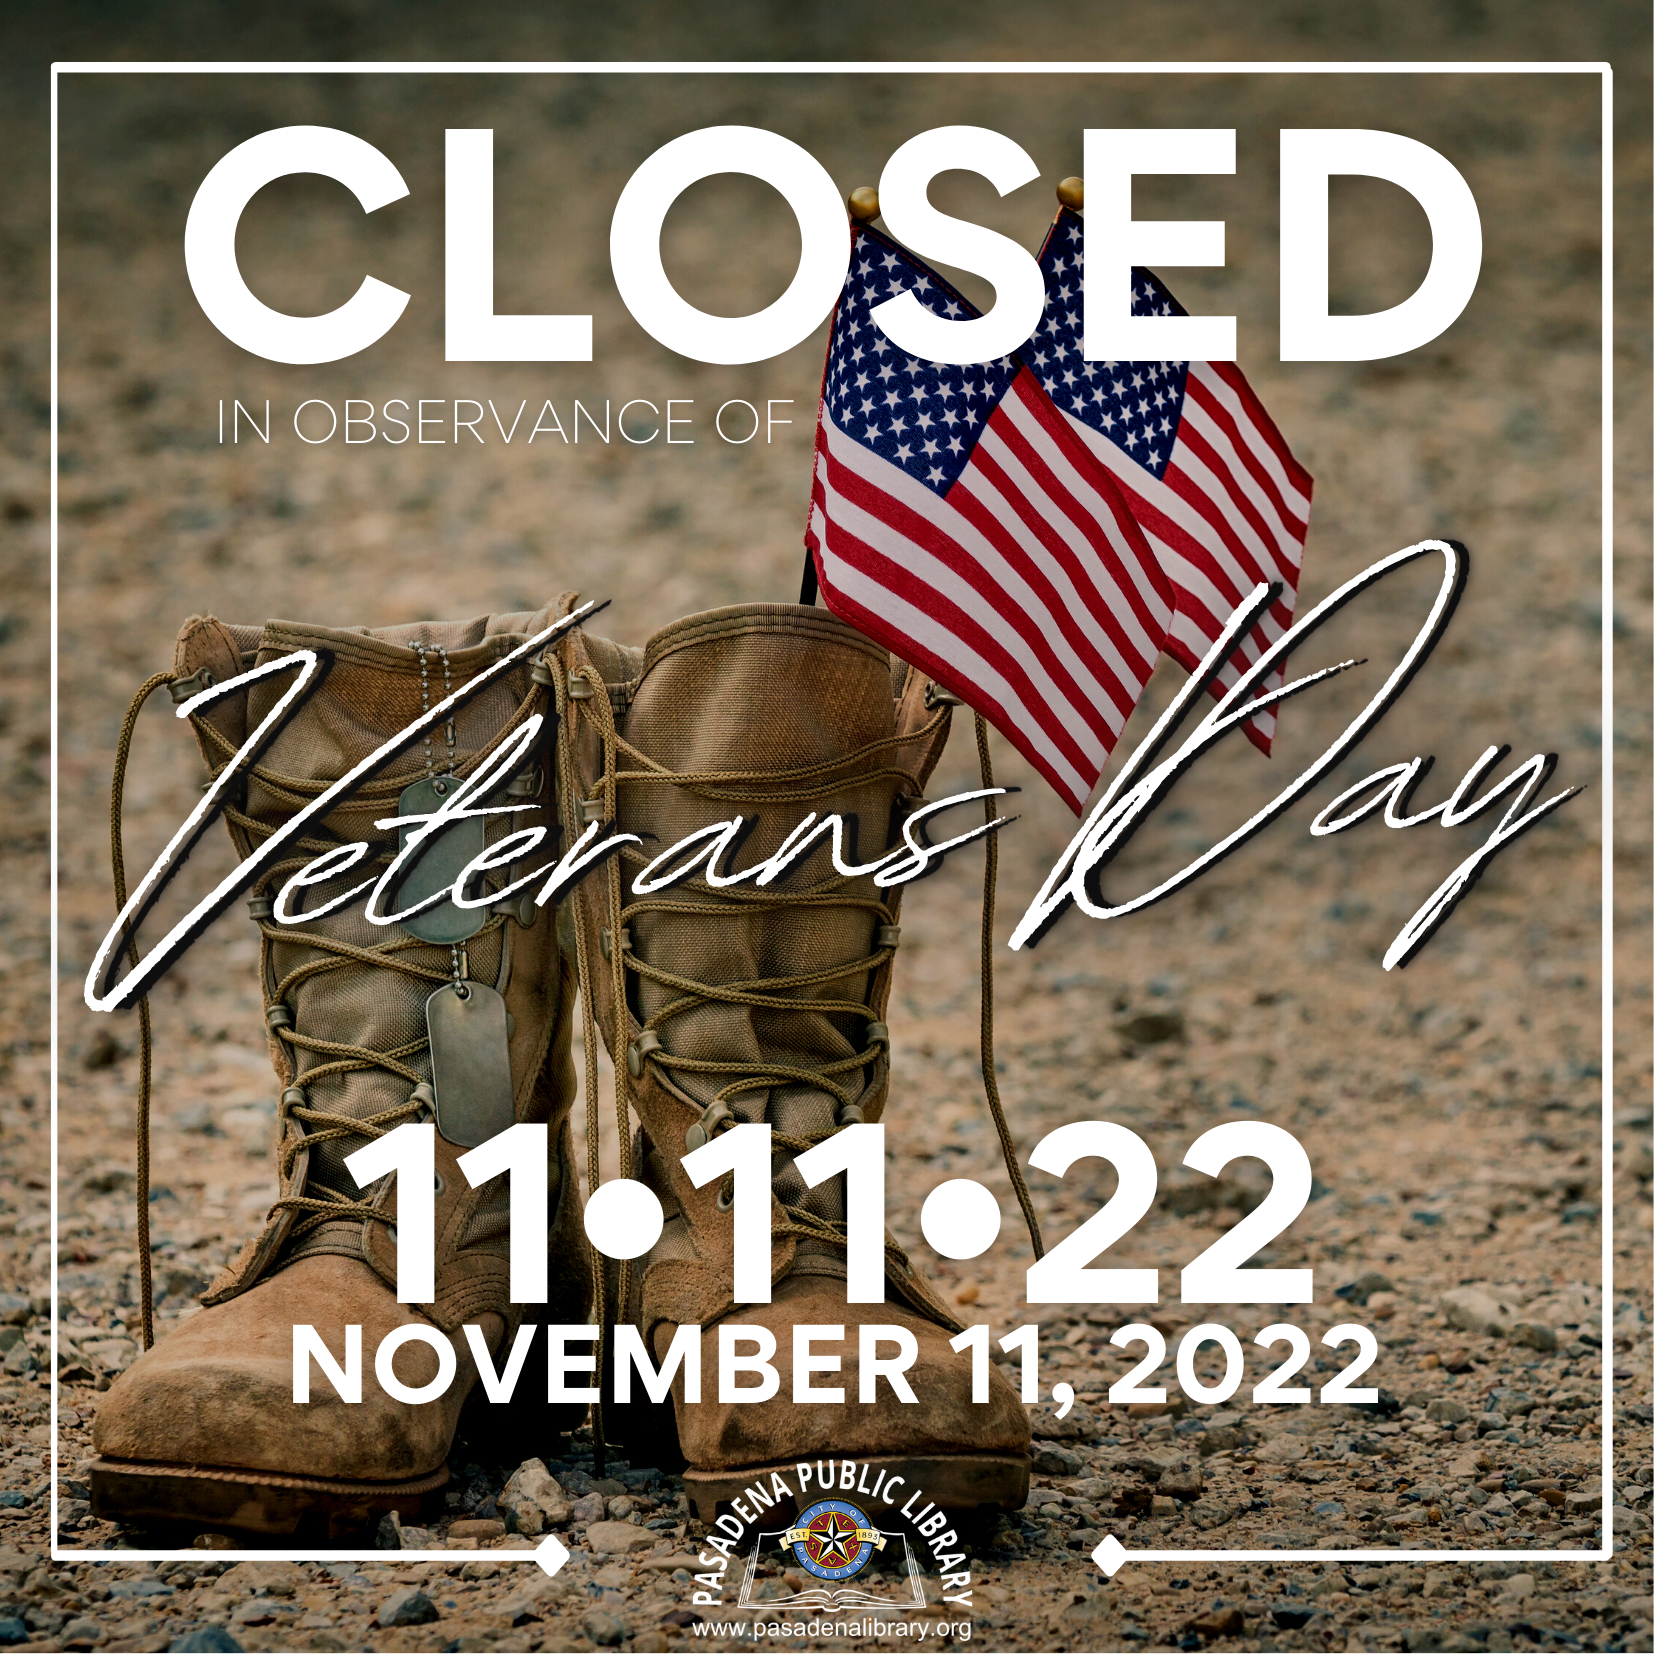 The Pasadena Public Library will be CLOSED on Friday, November 11, 2022 in observance of VETERANS DAY!  Library locations will re-open on Saturday, November 12 at 10:00AM.